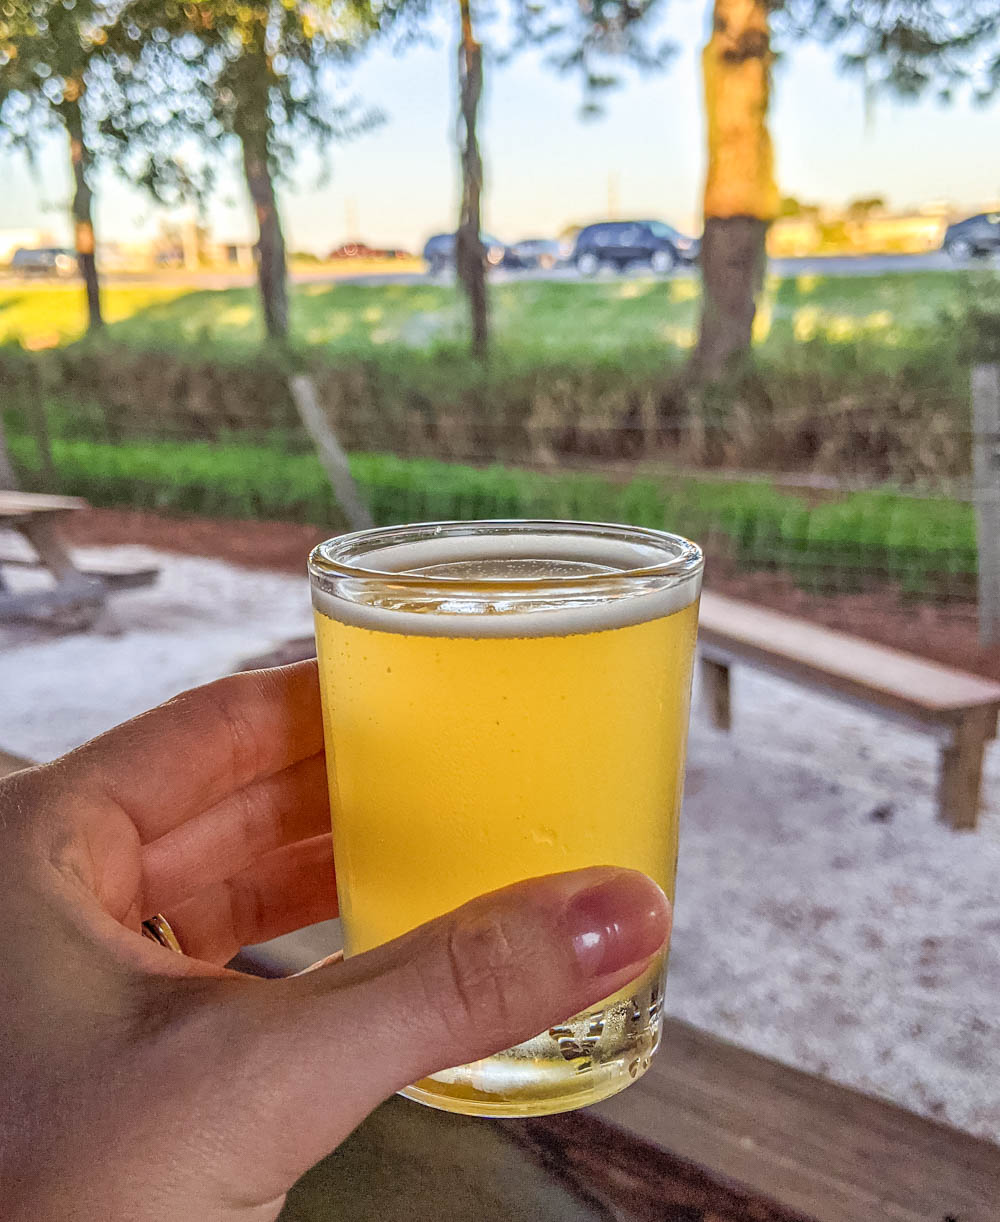 kolsch | Awesome breweries in palm beach county, florida | craft beer and cider in west palm beach